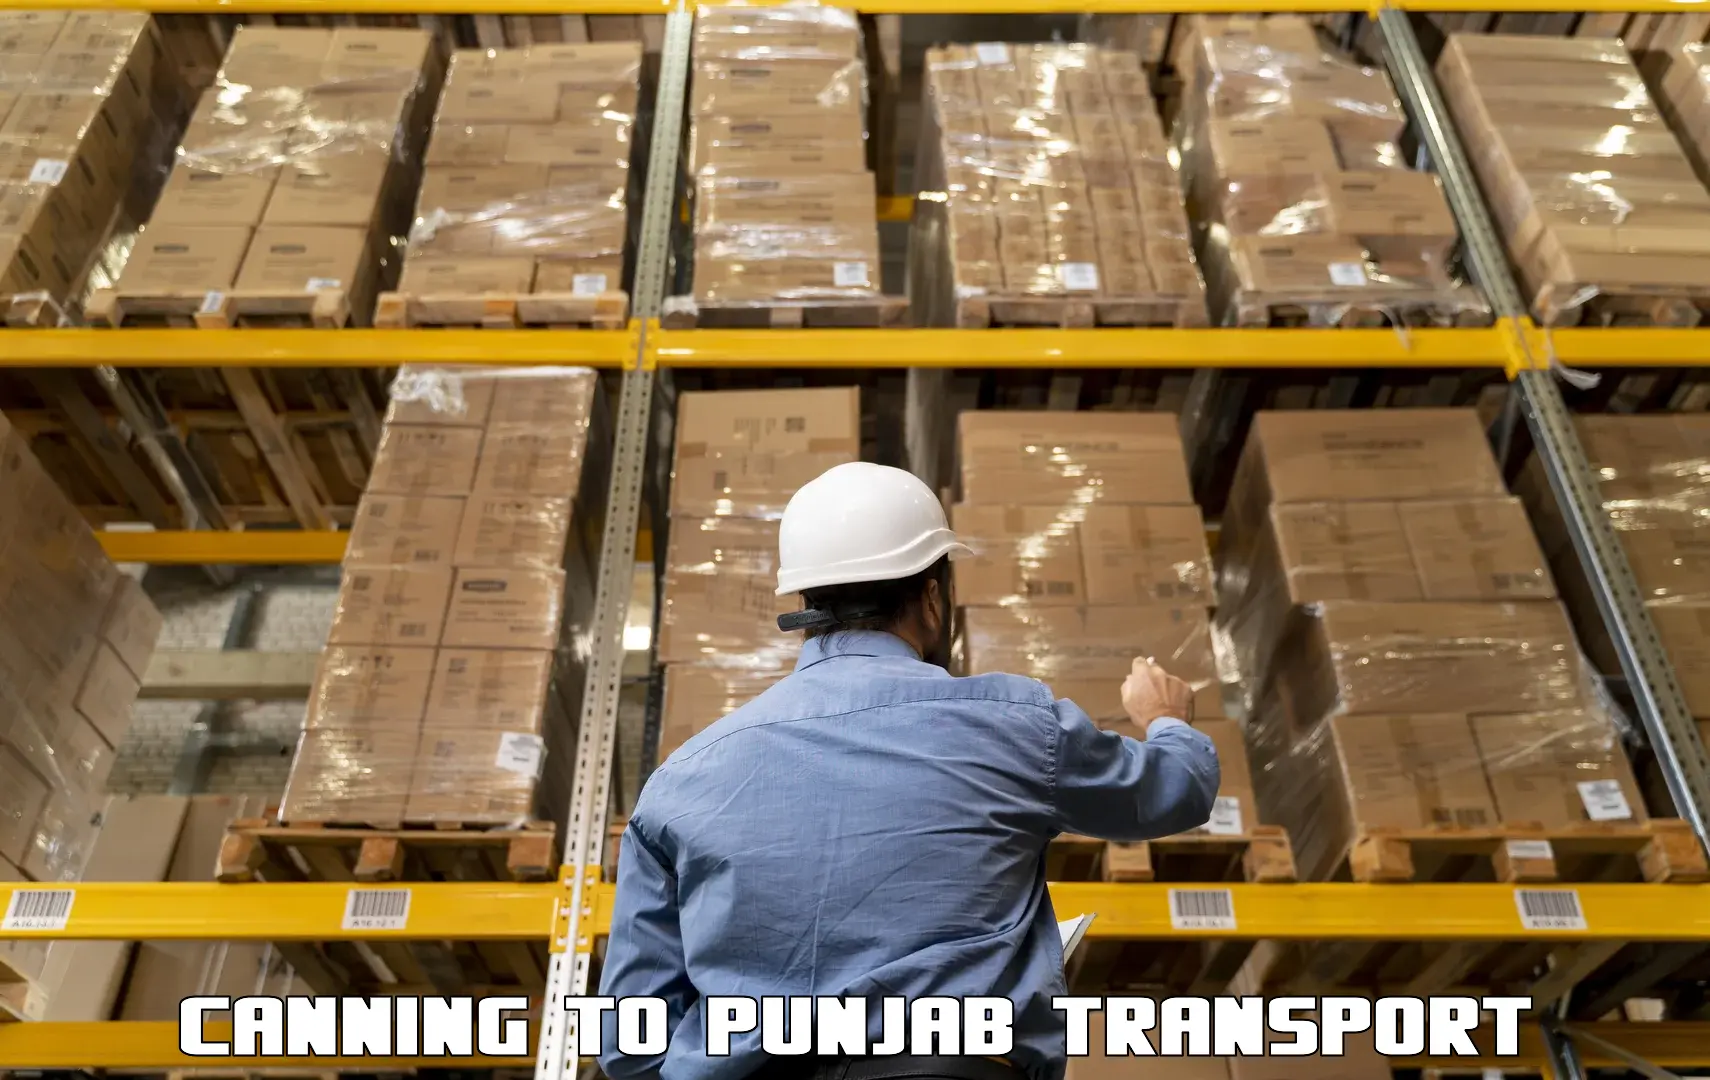 Transport in sharing Canning to Goindwal Sahib